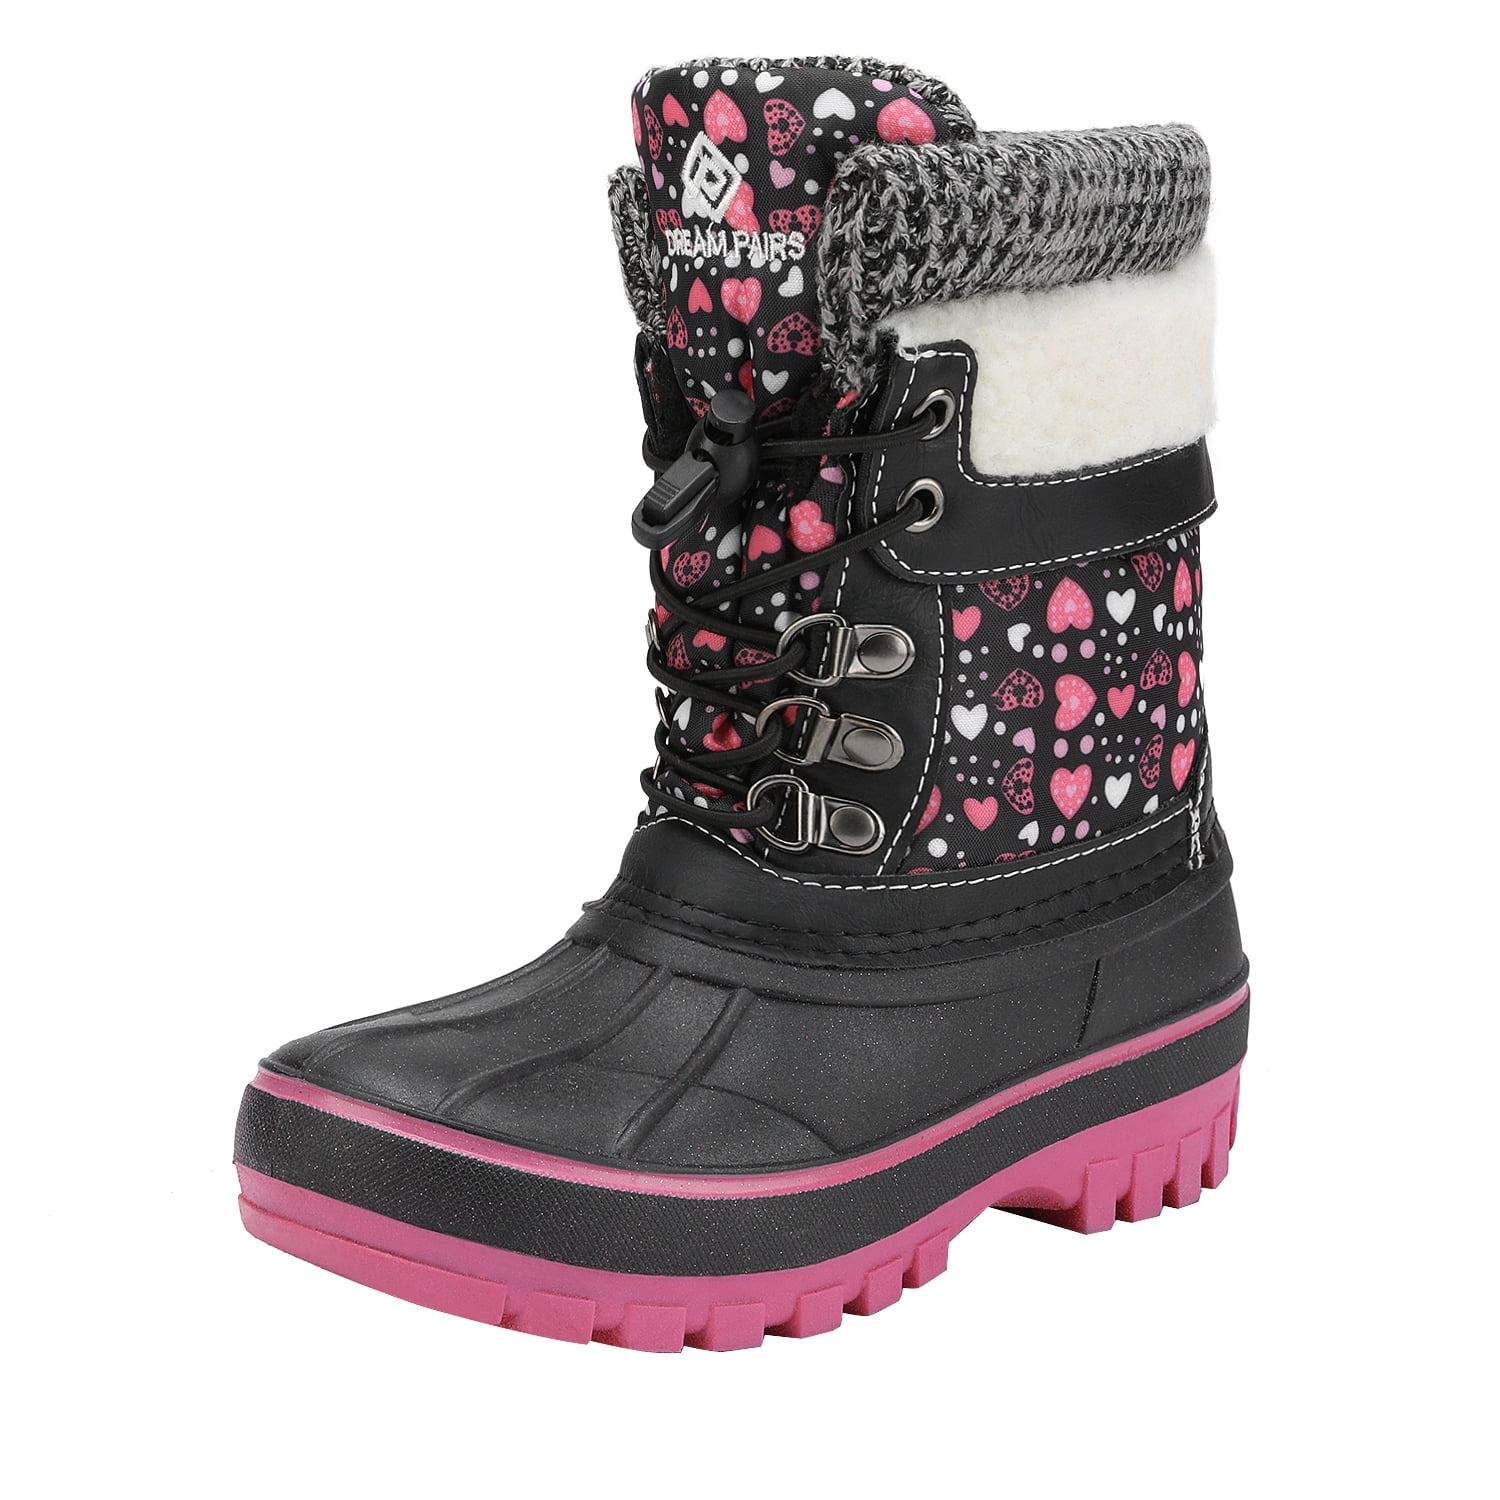 Boys Girls Warm Snow Boots Cold Weather Outdoor Waterproof Winter Boots Toddler/Little Kid 